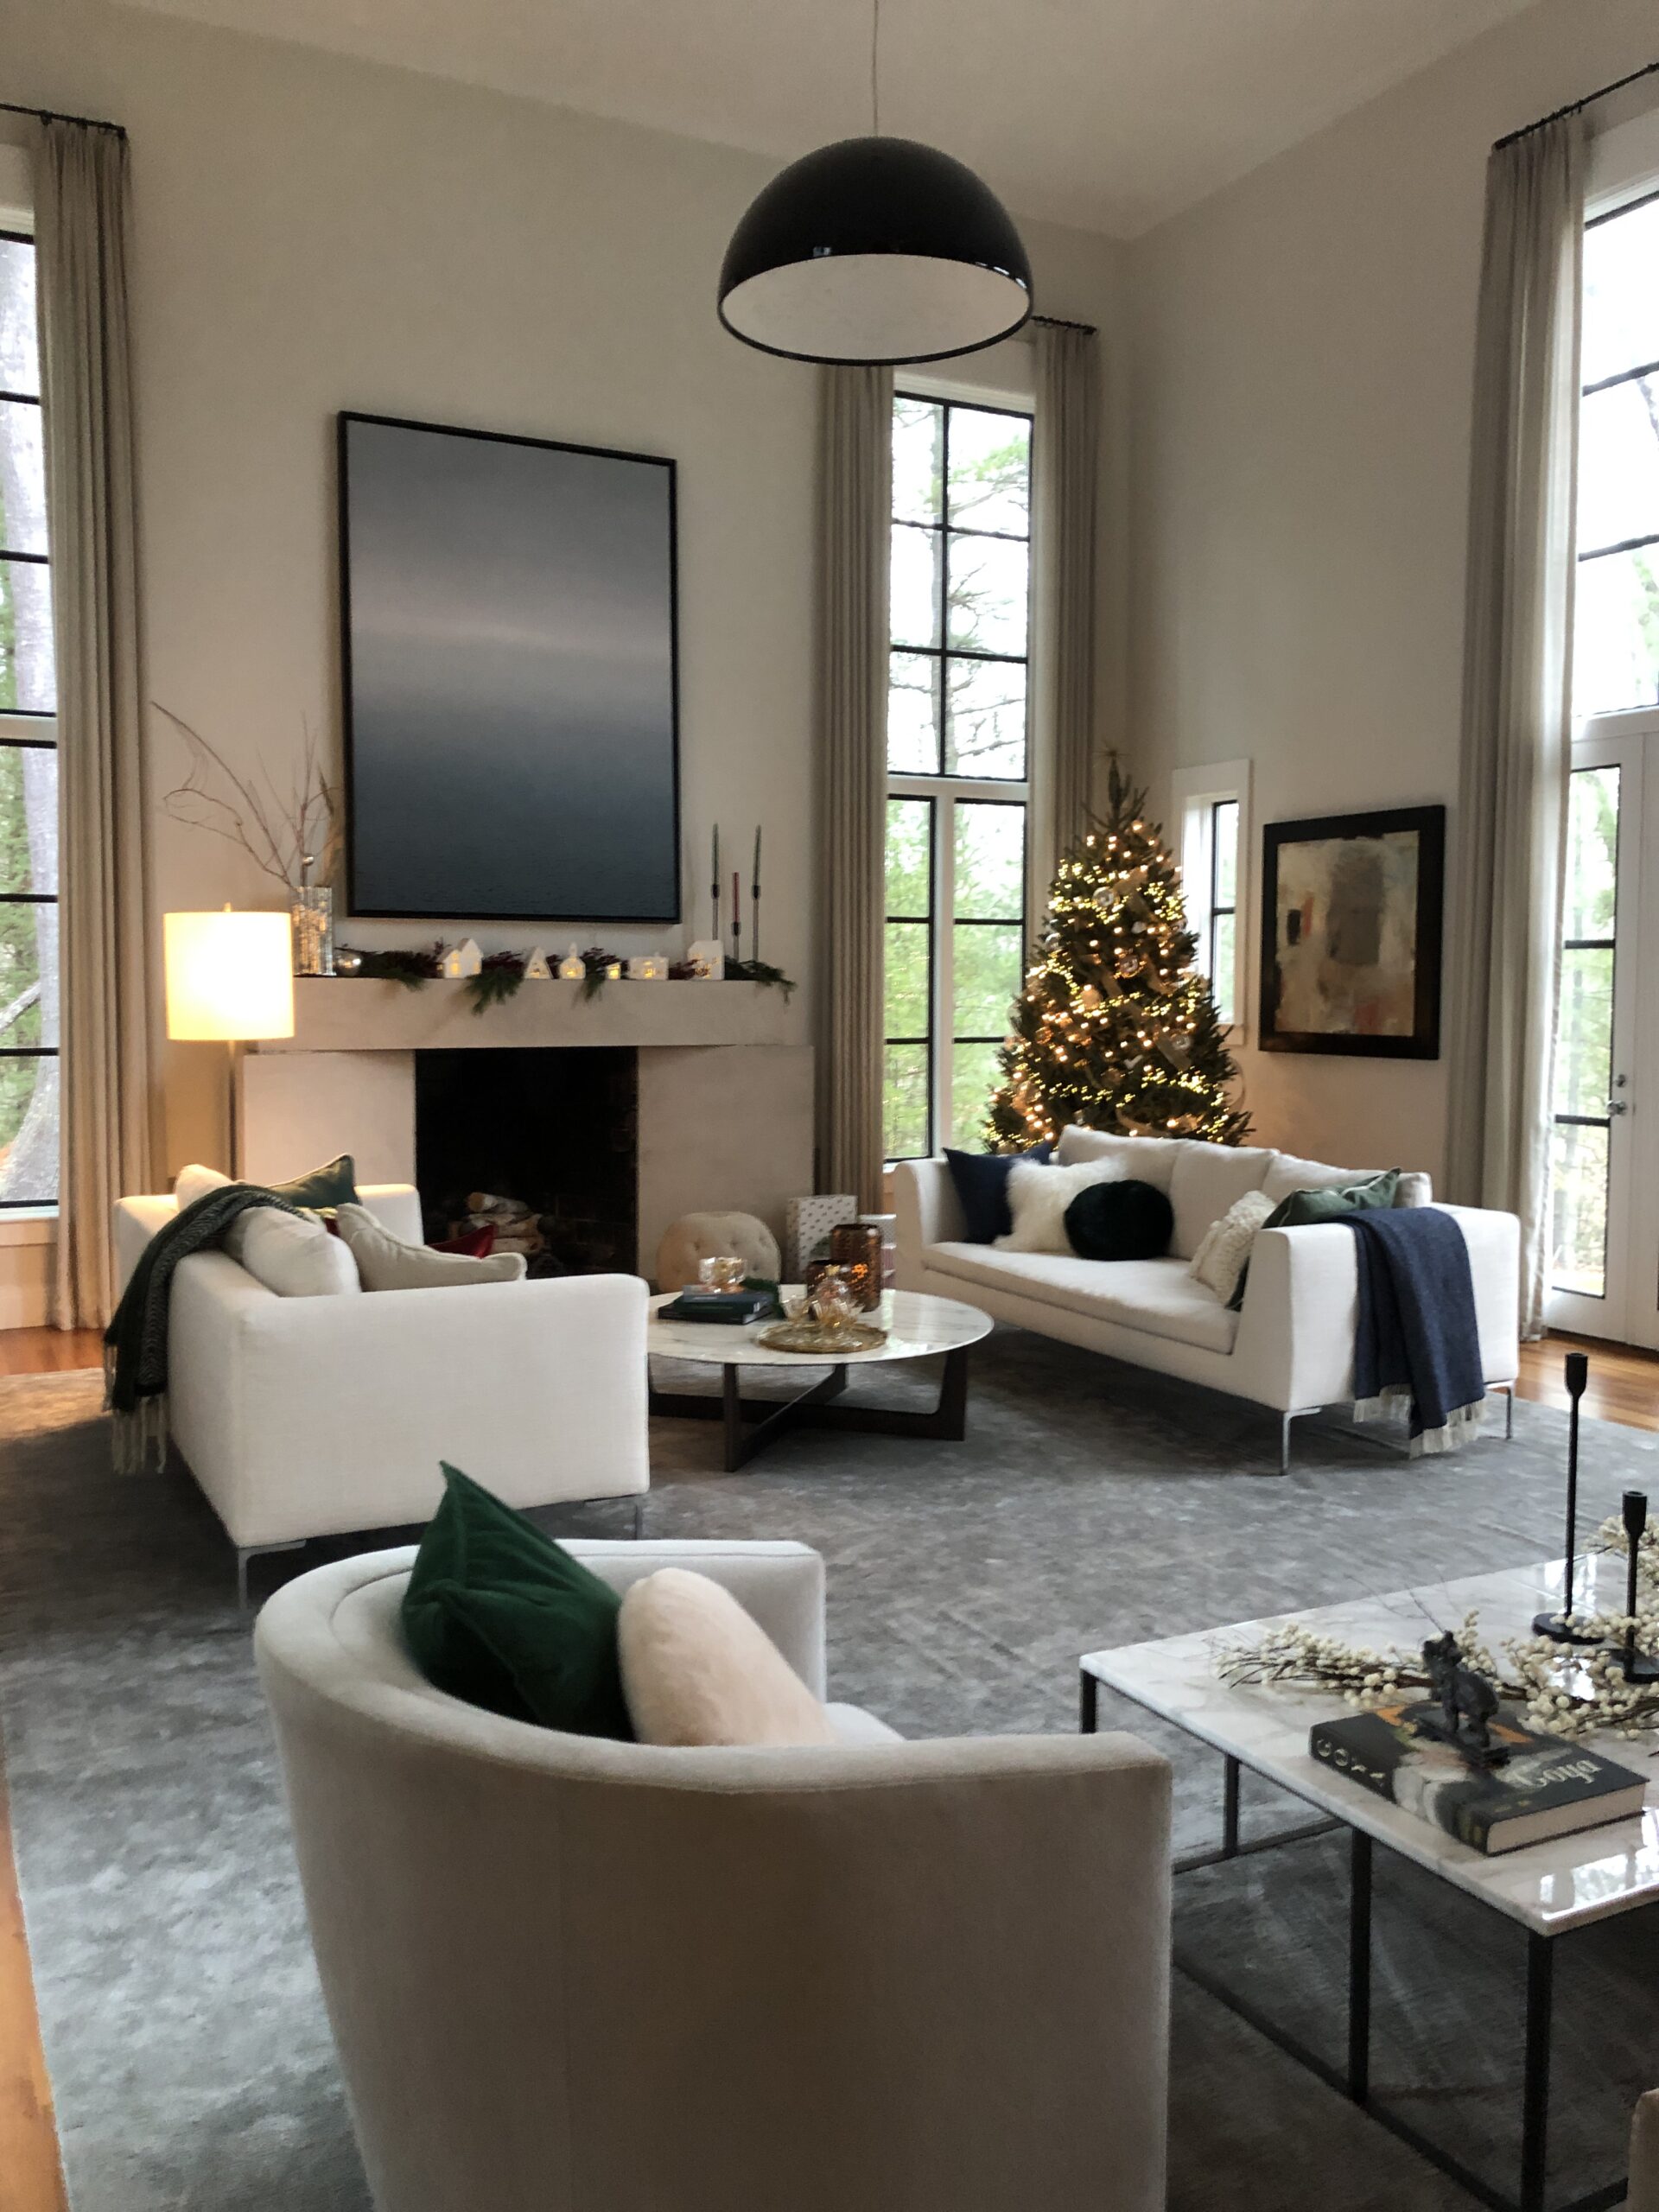 Modern Christmas, tall ceilings, ornements, greenery, accessories